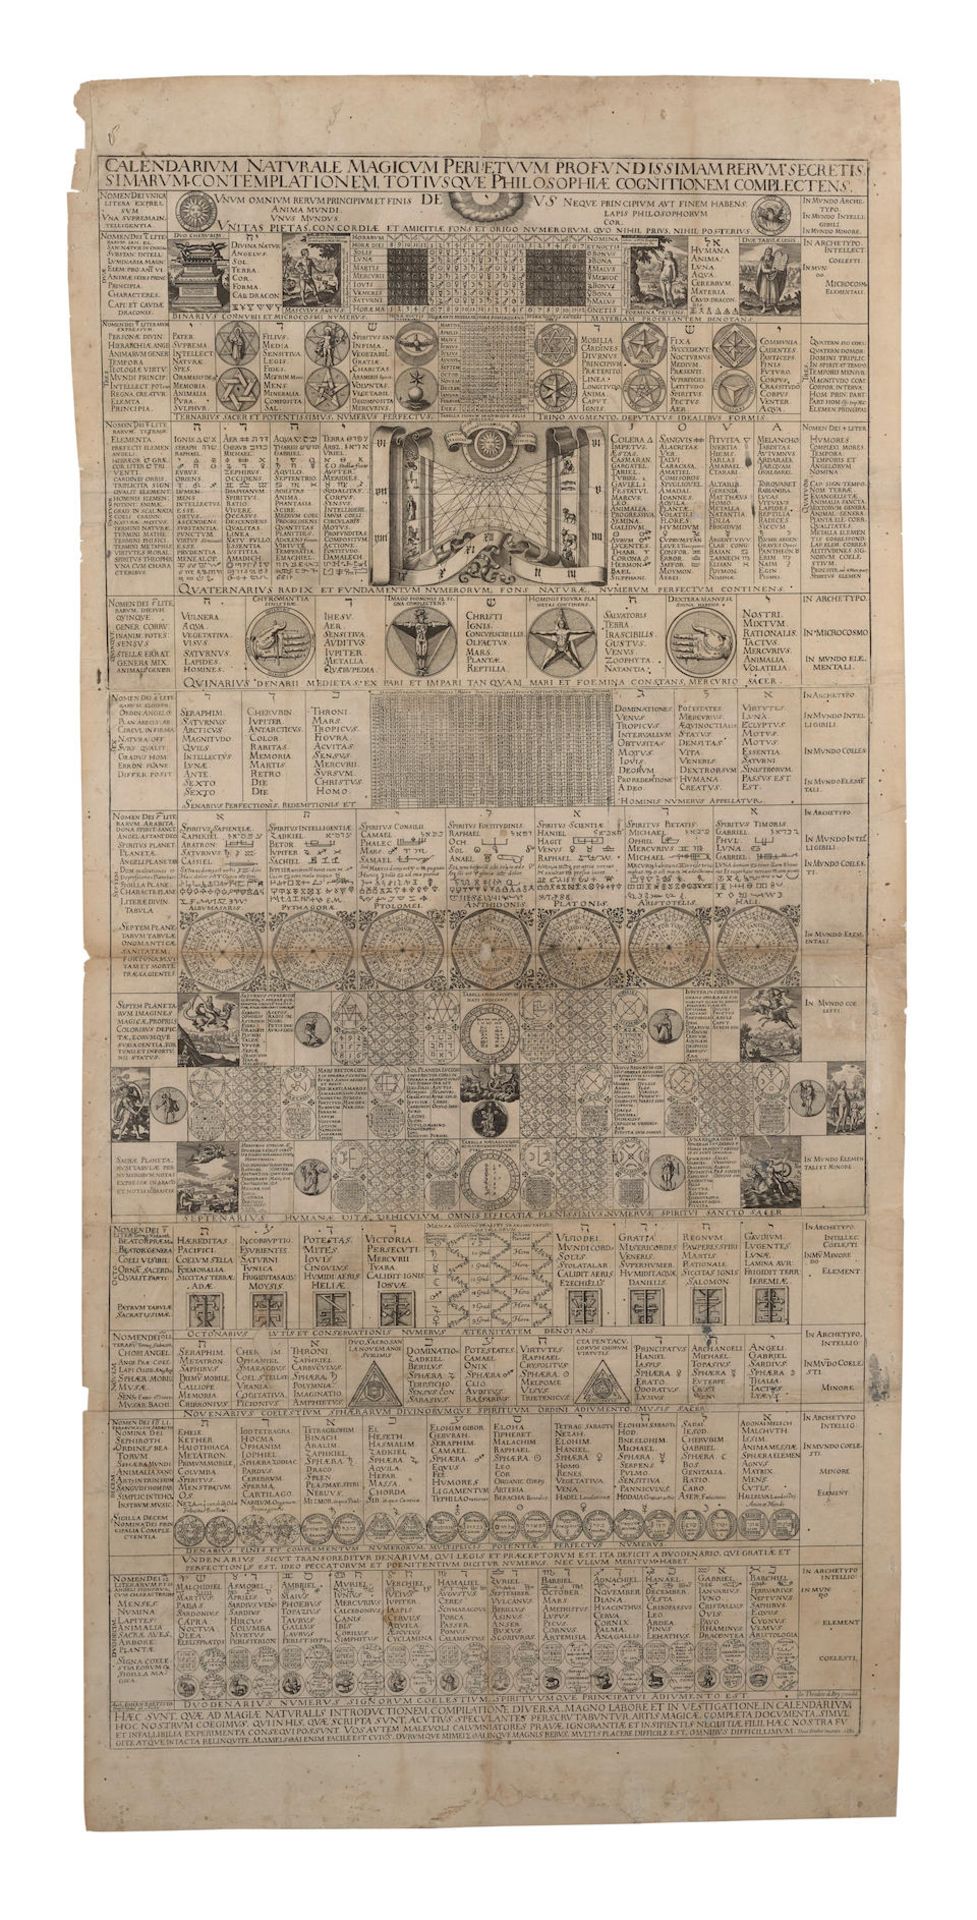 [OCCULT SCIENCE] 'THE MAGICAL CALENDAR OF TYCHO BRAHE': RARE HERMETIC BROADSIDE. GROSSCHEDEL, JO...